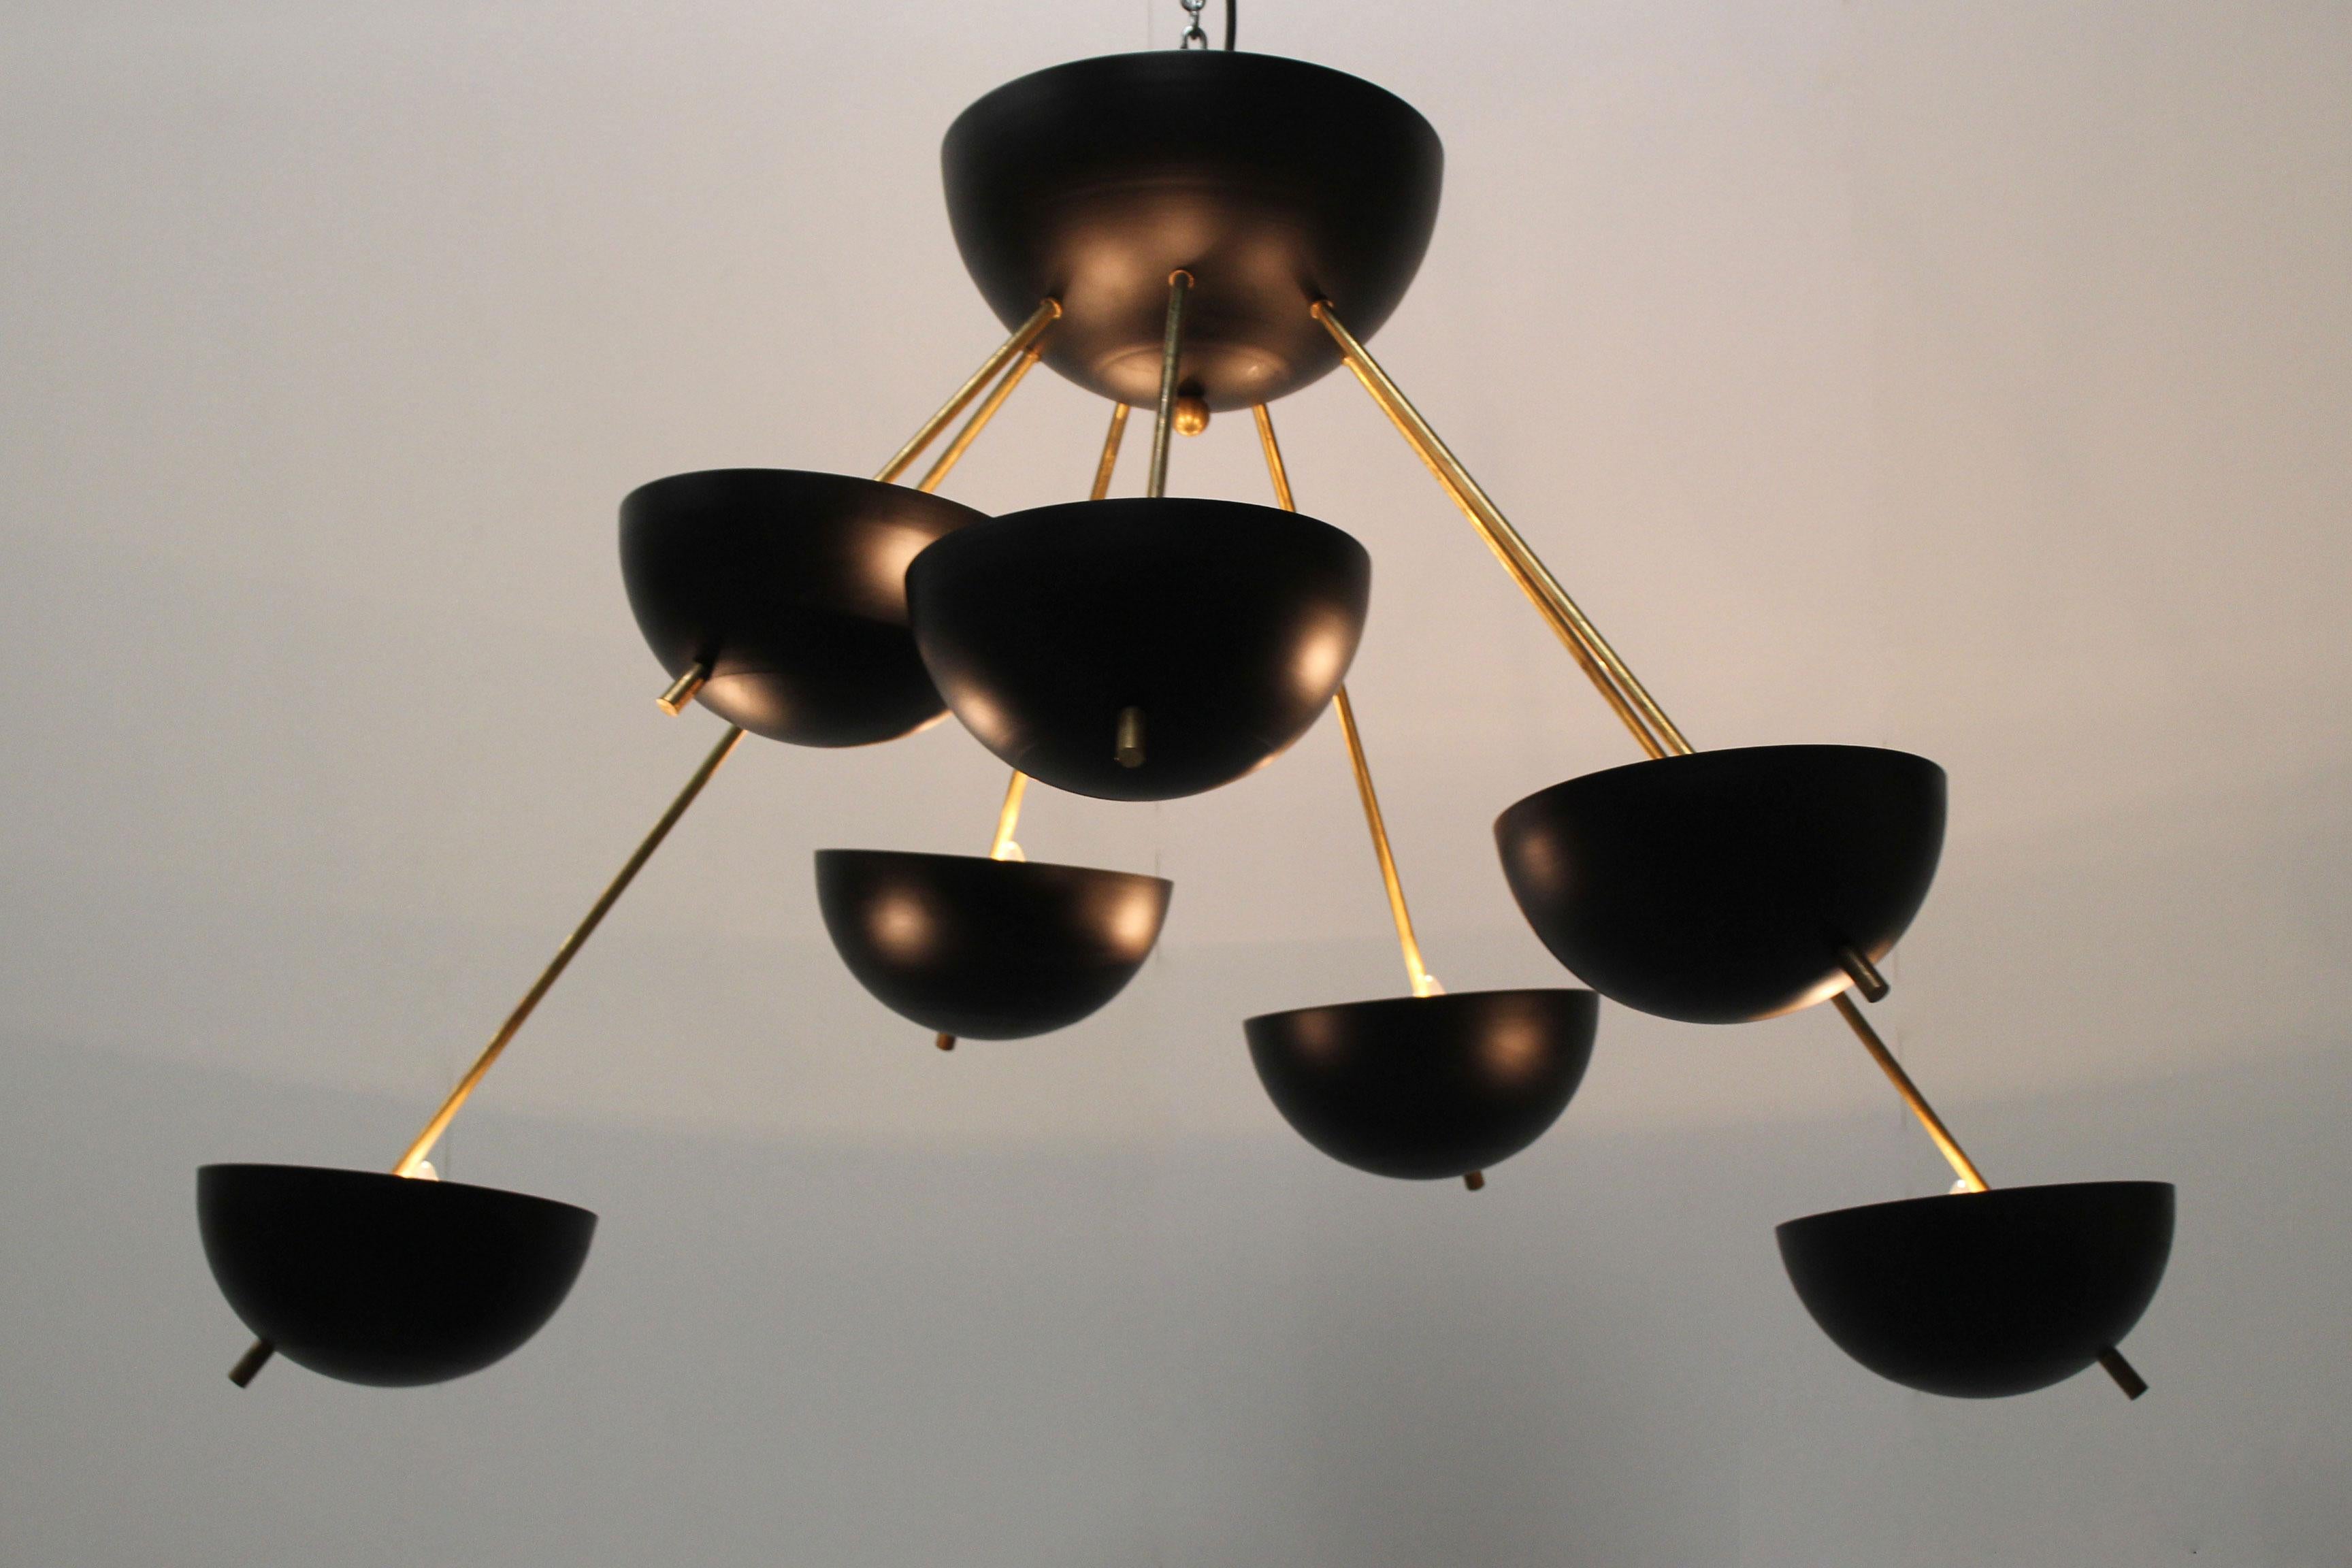 Magnificent midcentury design Sputnik chandelier attributed to Stilnovo, circa 1958
It has a wonderful minimalistic Stilnovo attributed design with lines inspired by the Space Age.
The chandelier has seven sockets and is fully rewired. Brass shows